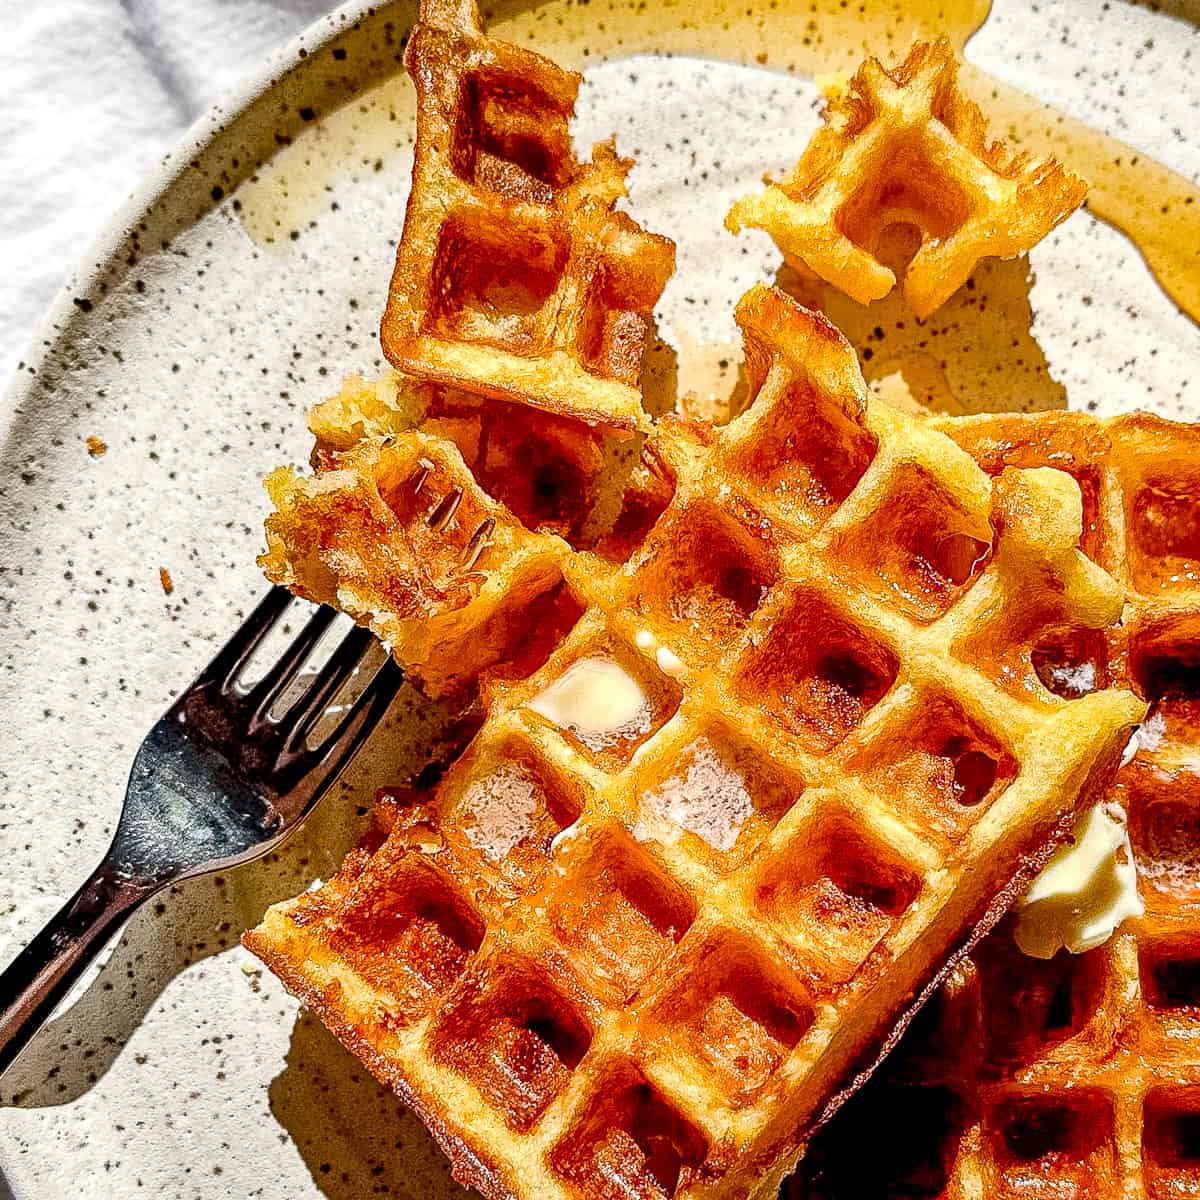 holding a forkful of waffle.